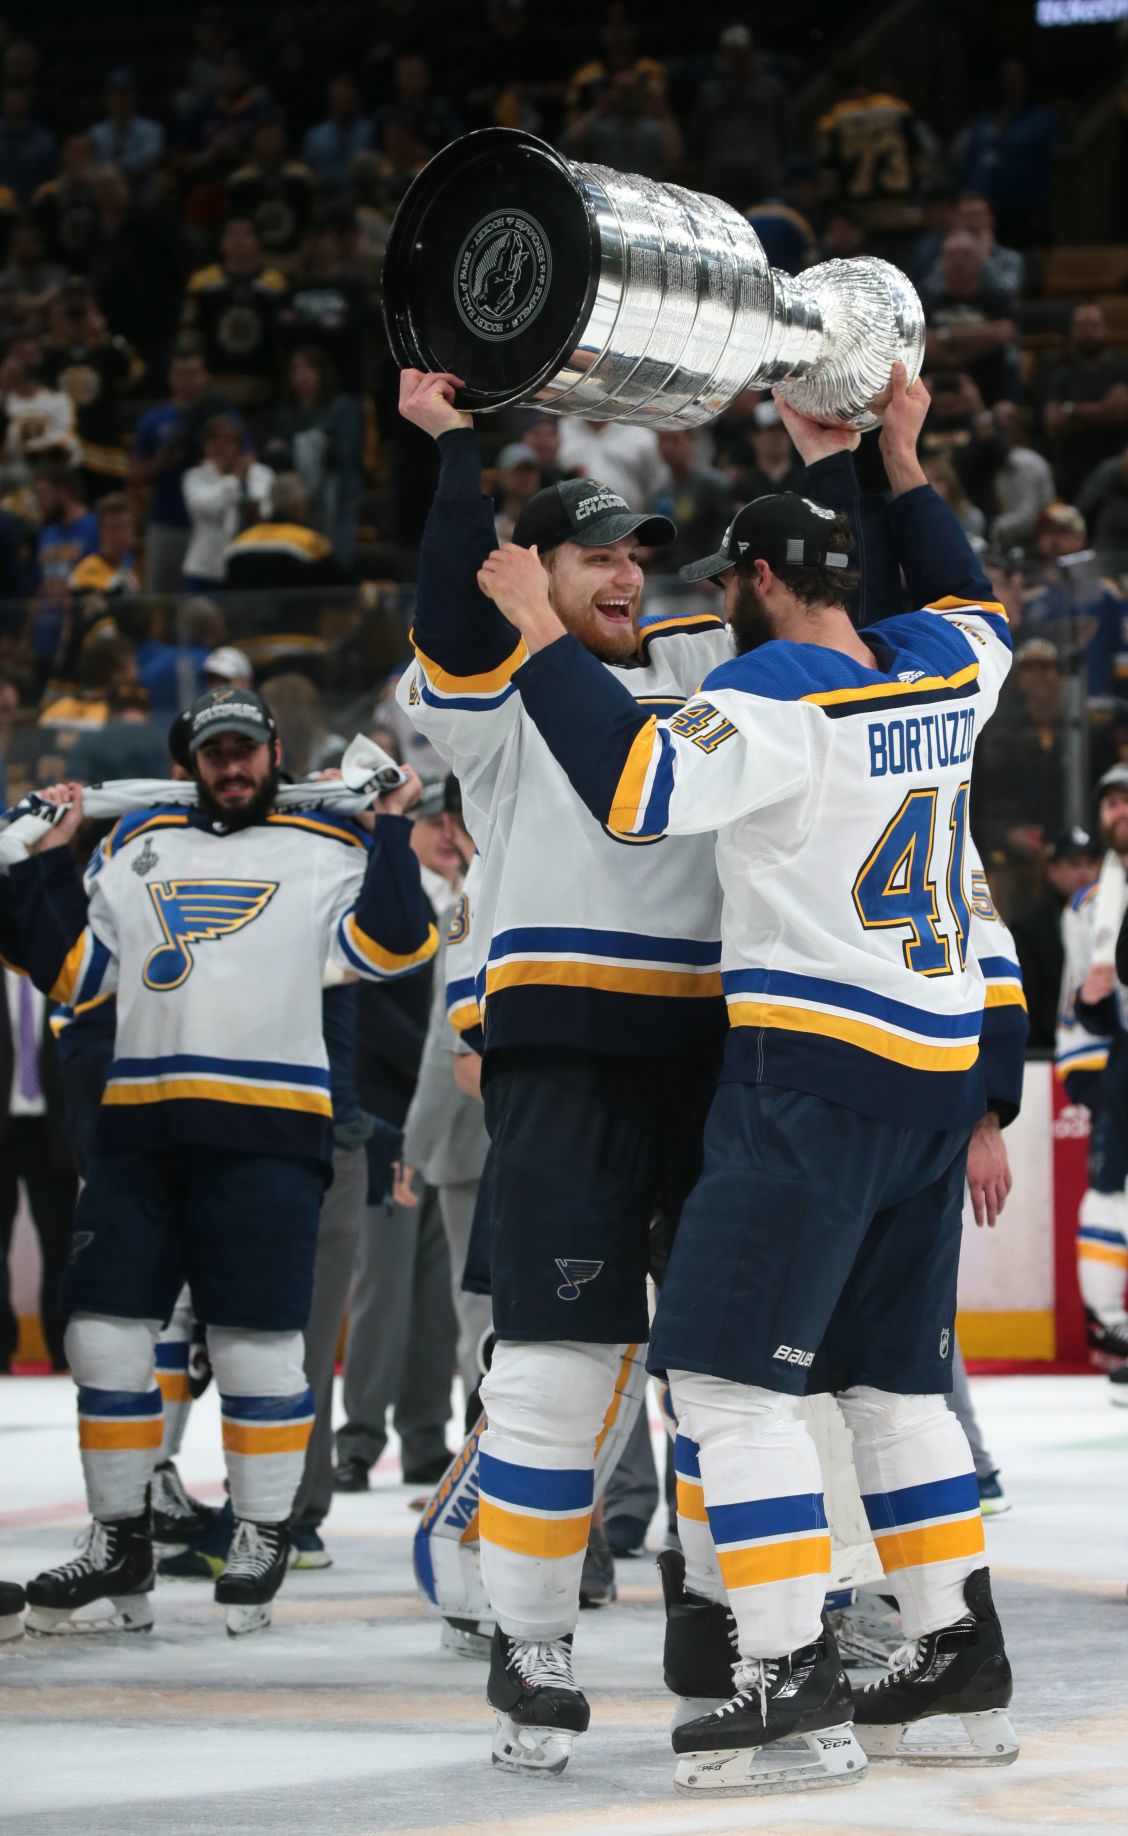 Relive The Run: The St. Louis Blues became Stanley Cup